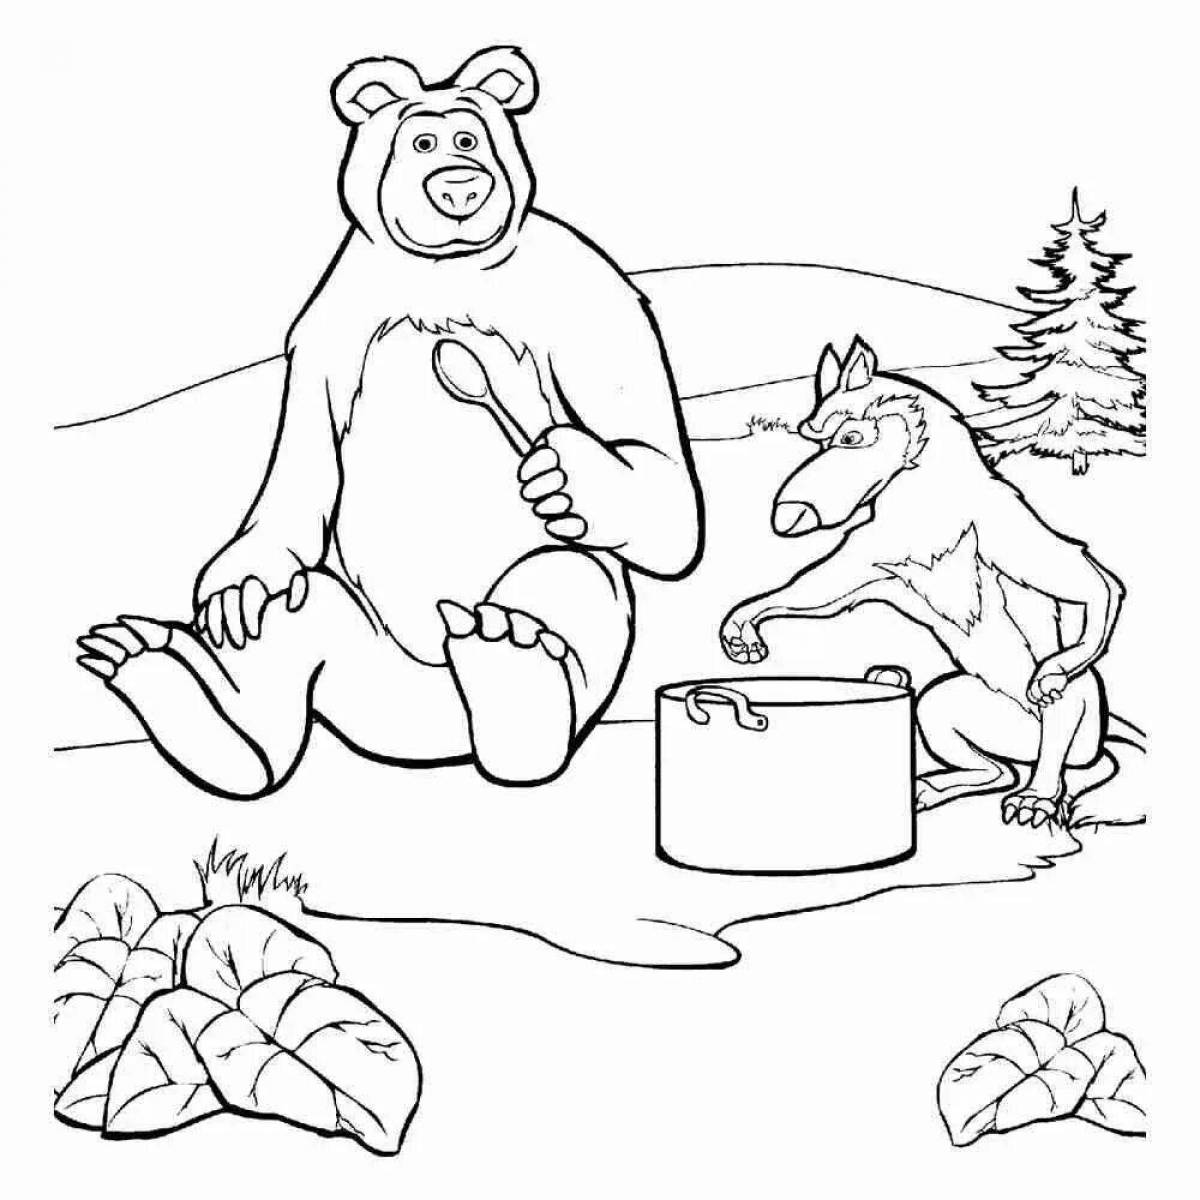 Coloring page wild bear from masha and bear